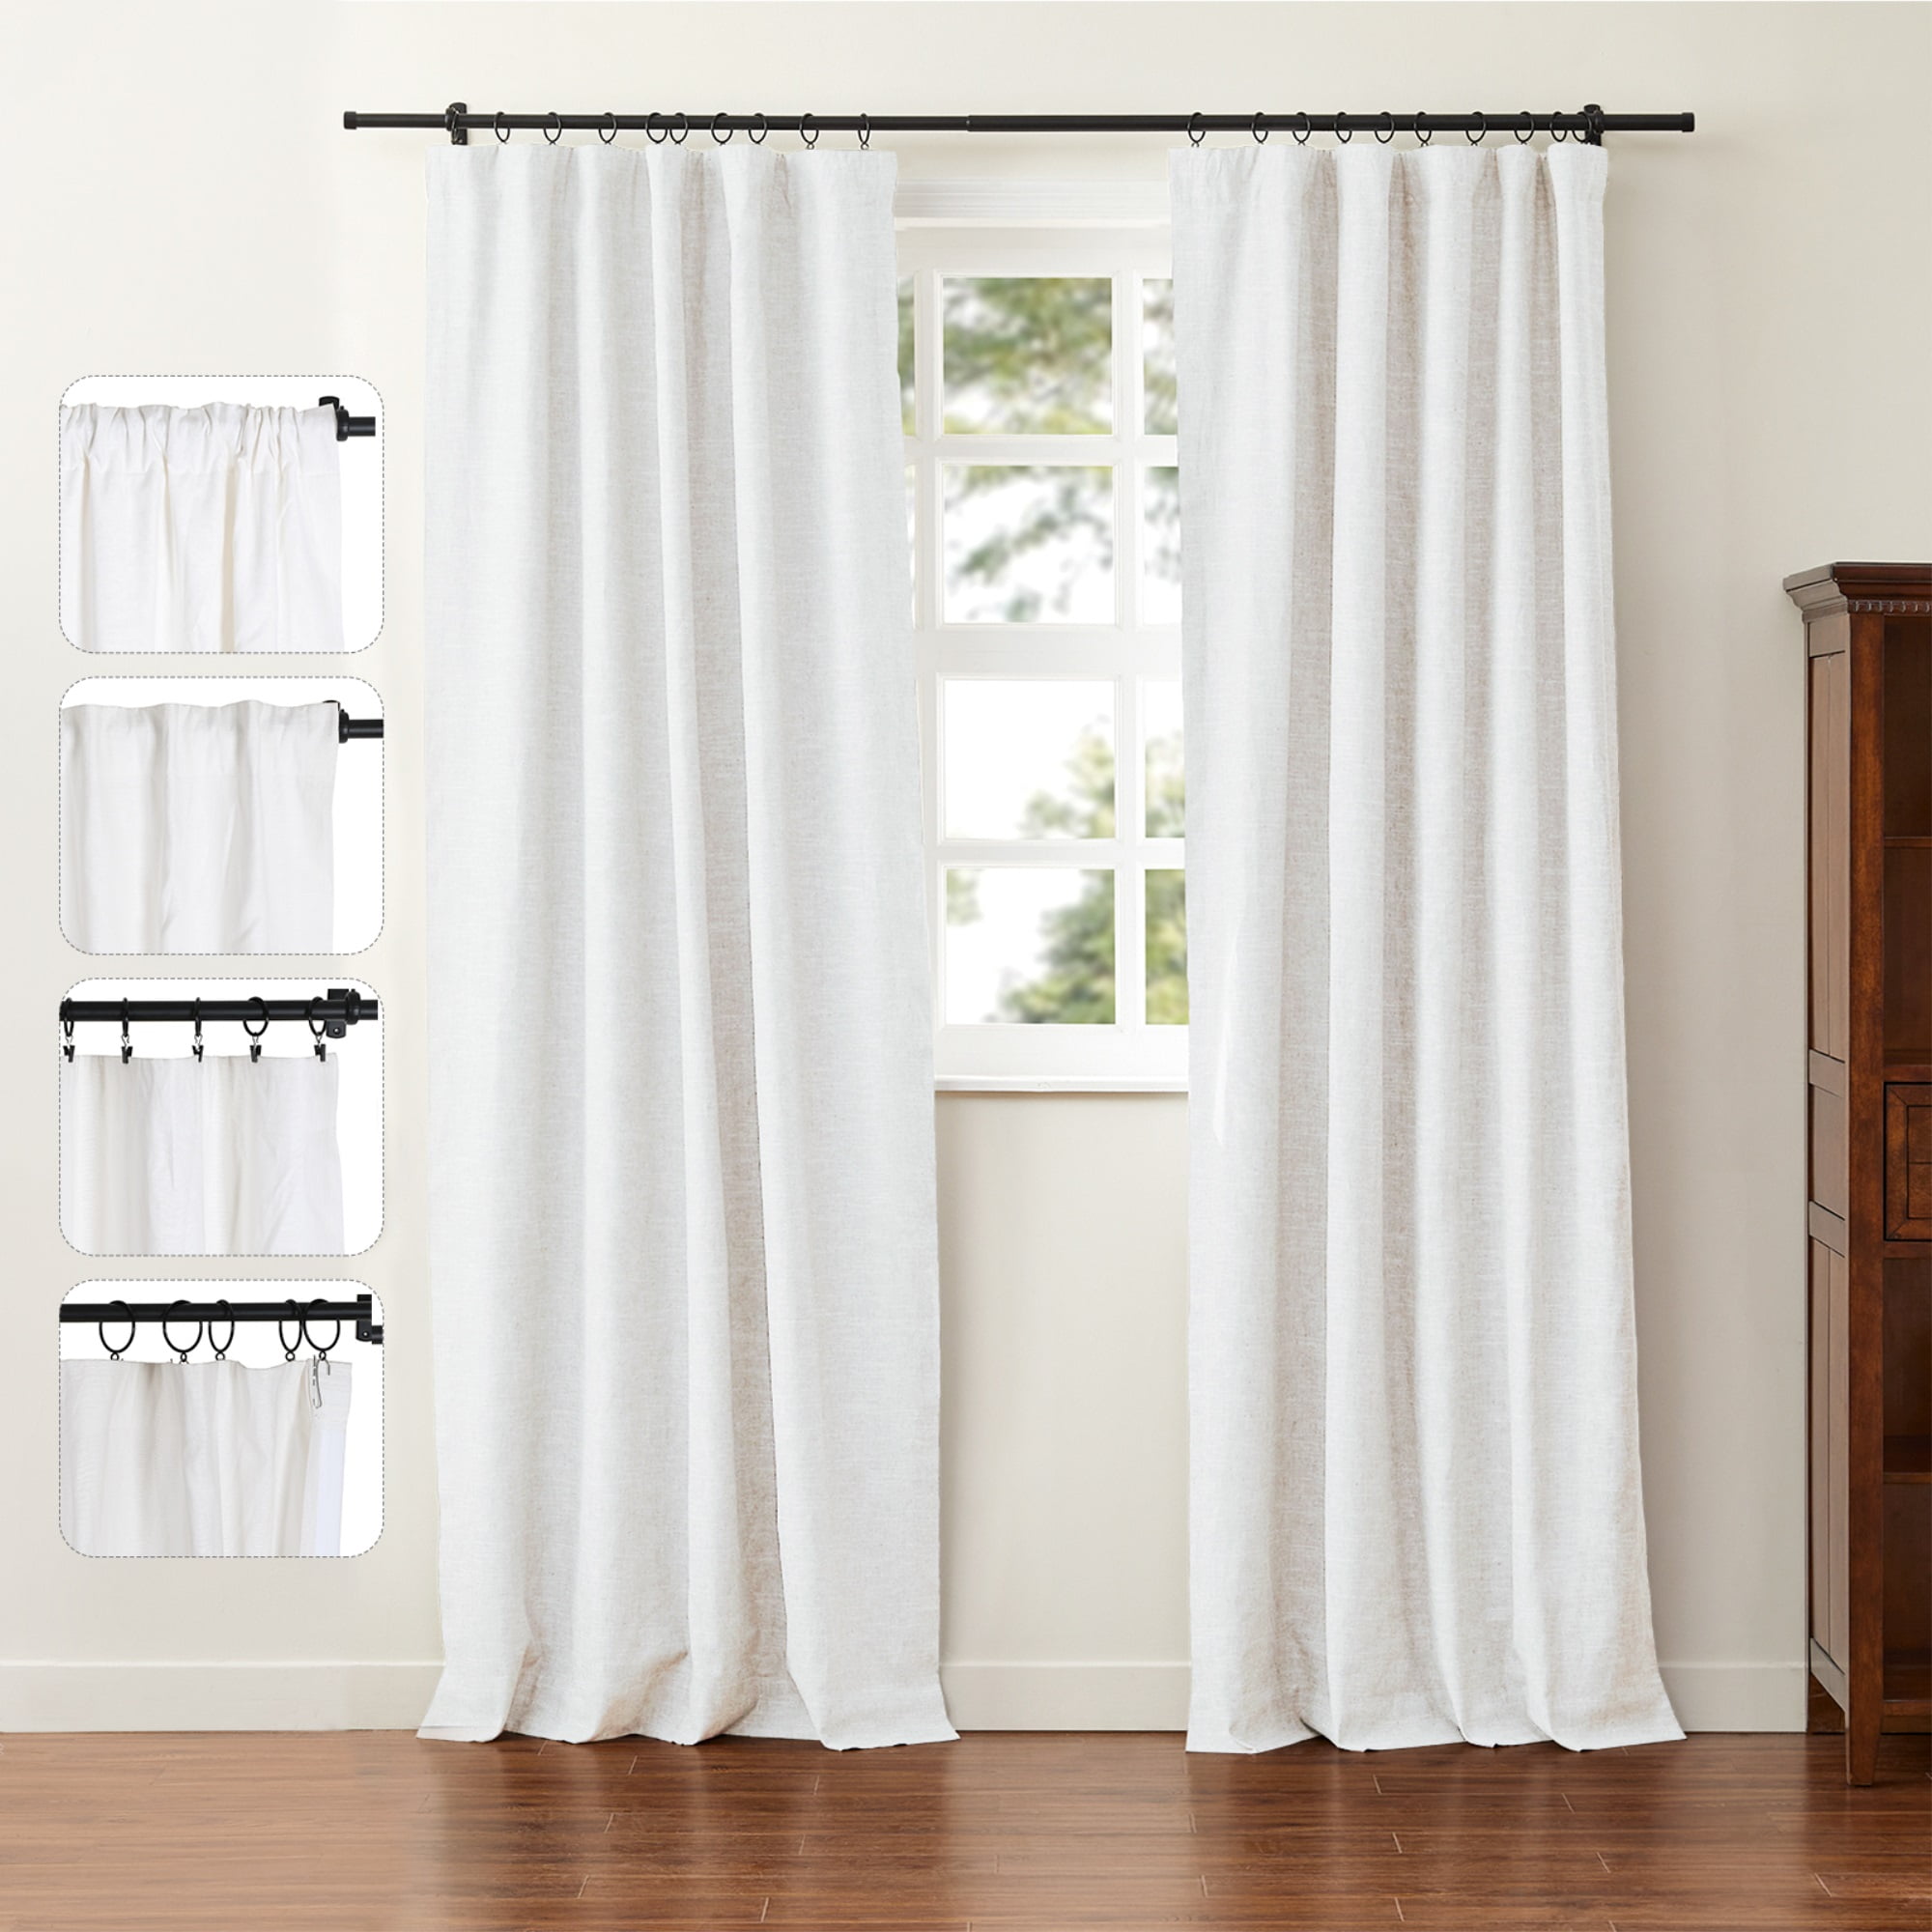 String Curtain White 3 ft x 20 ft - Polyester & Cotton Nassau (trimmable  length!)